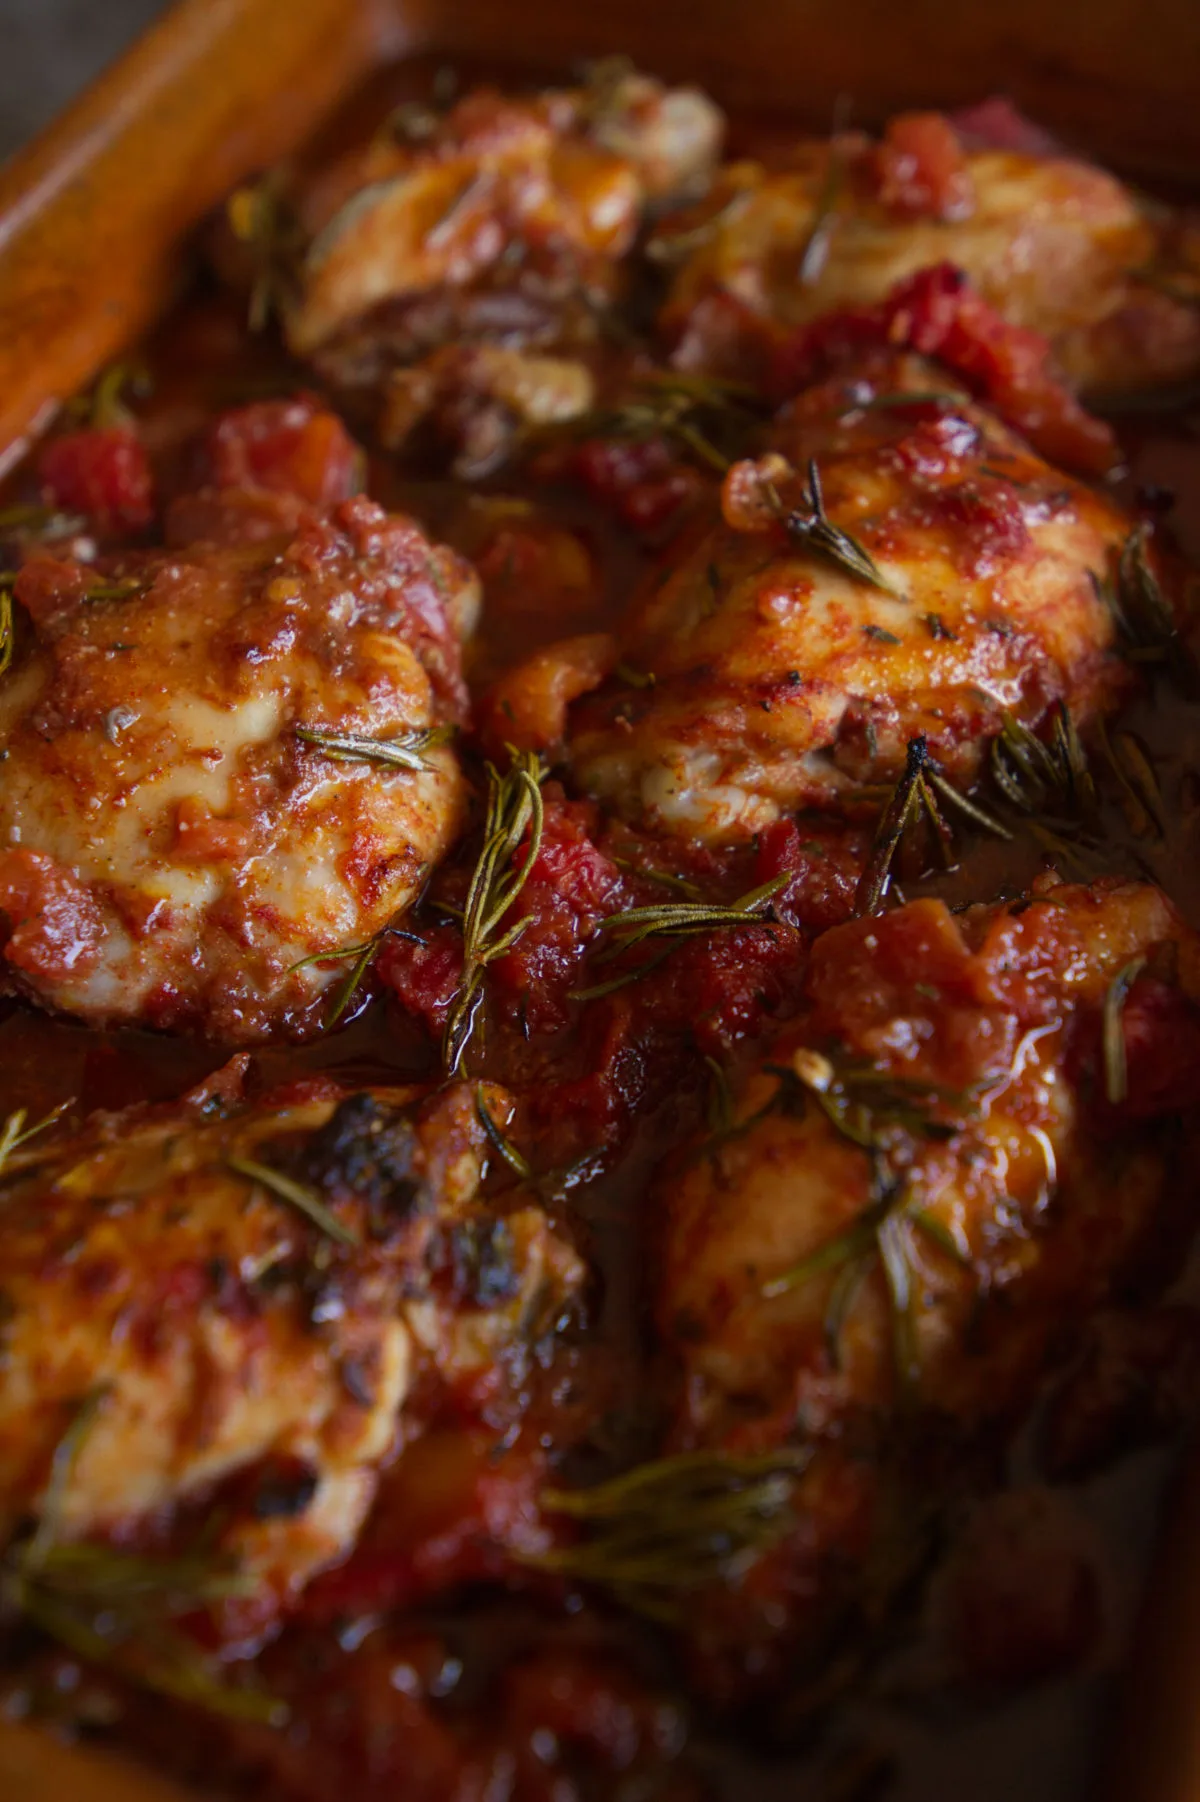 Roast chicken thighs cooked in a red wine, tomato, and herb sauce.